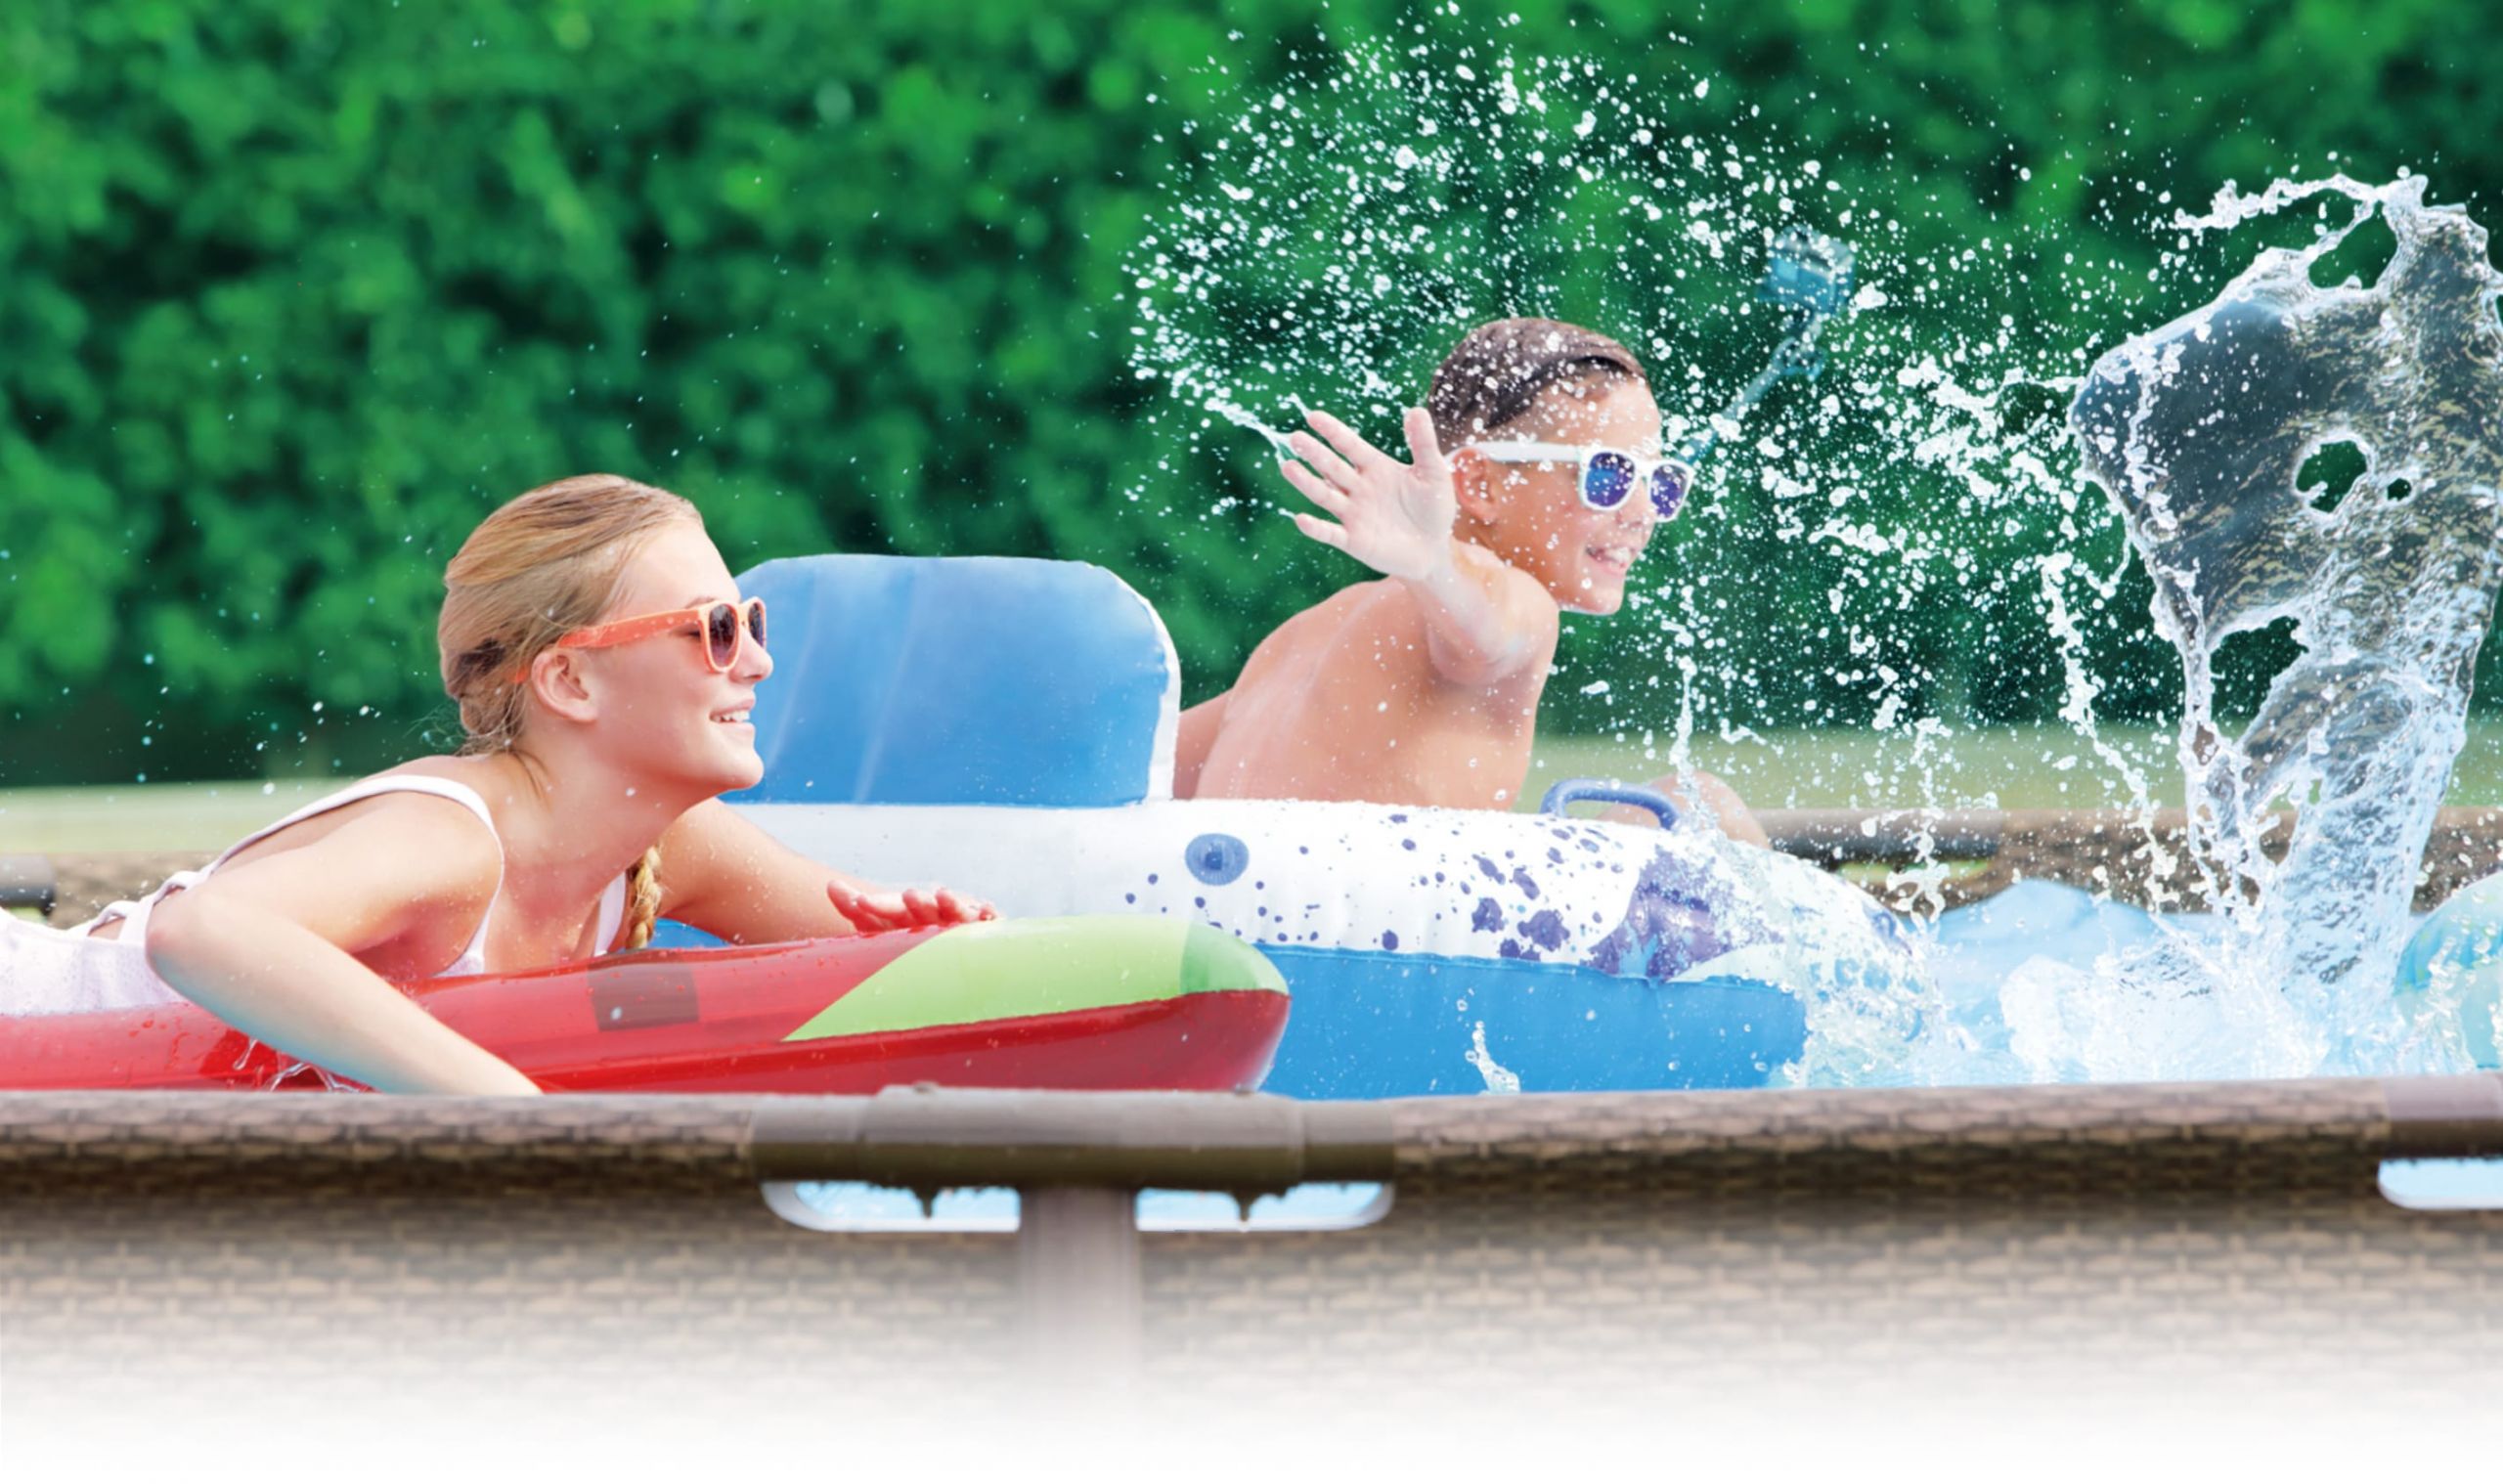 Above Ground Pool Service
 Top 10 Ground Pools Under $500 Pool Service News